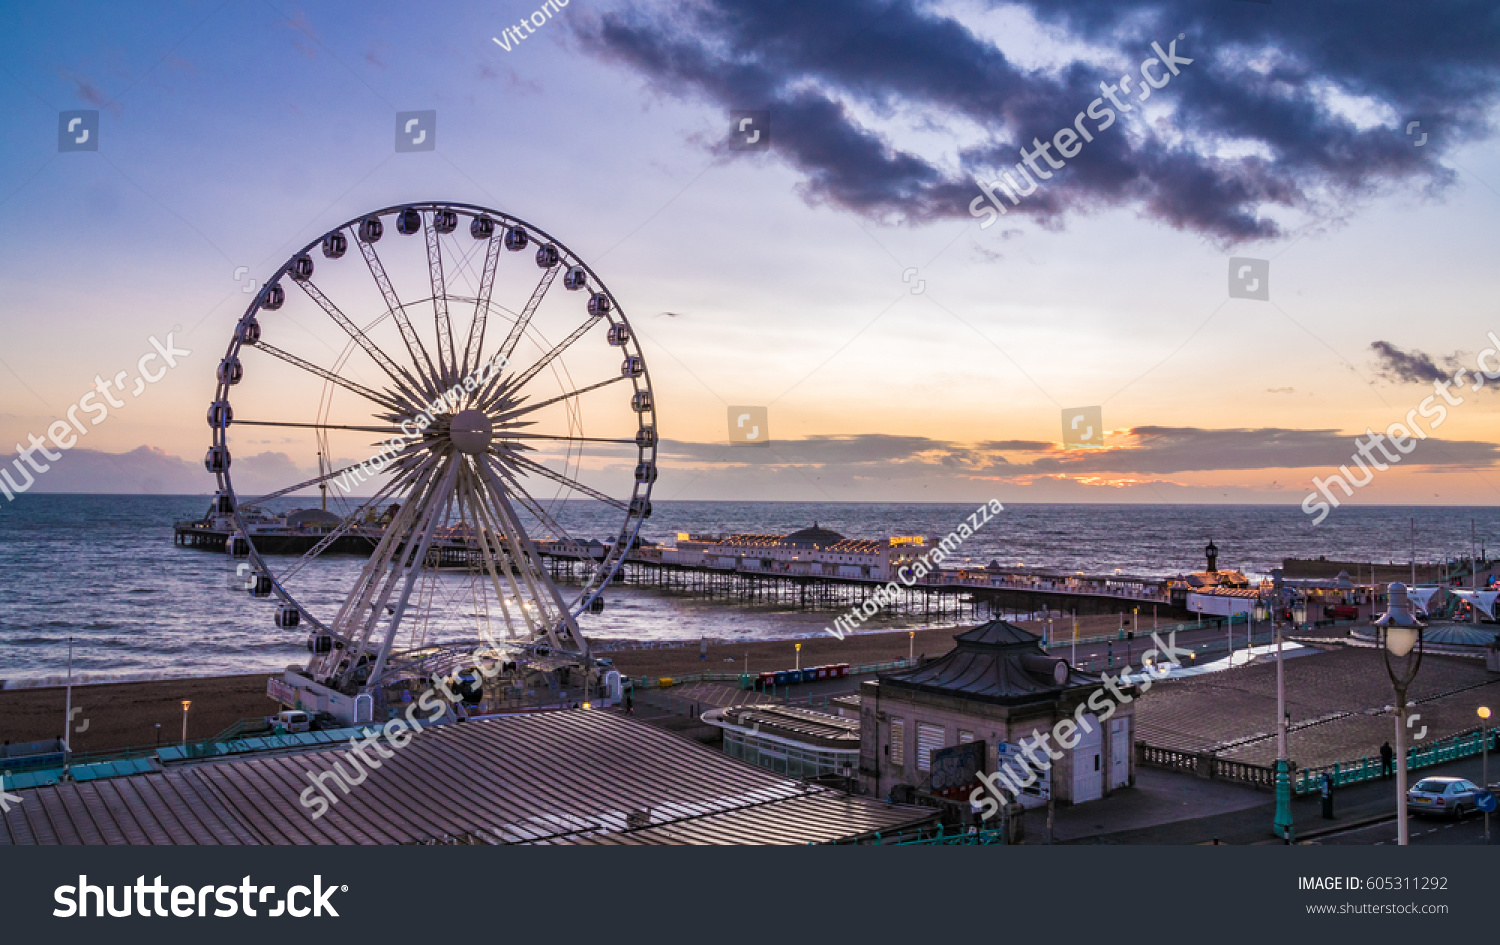 The Victorian Brighton Pier, also known as the Palace Pier and the Brighton wheel at sunset #605311292